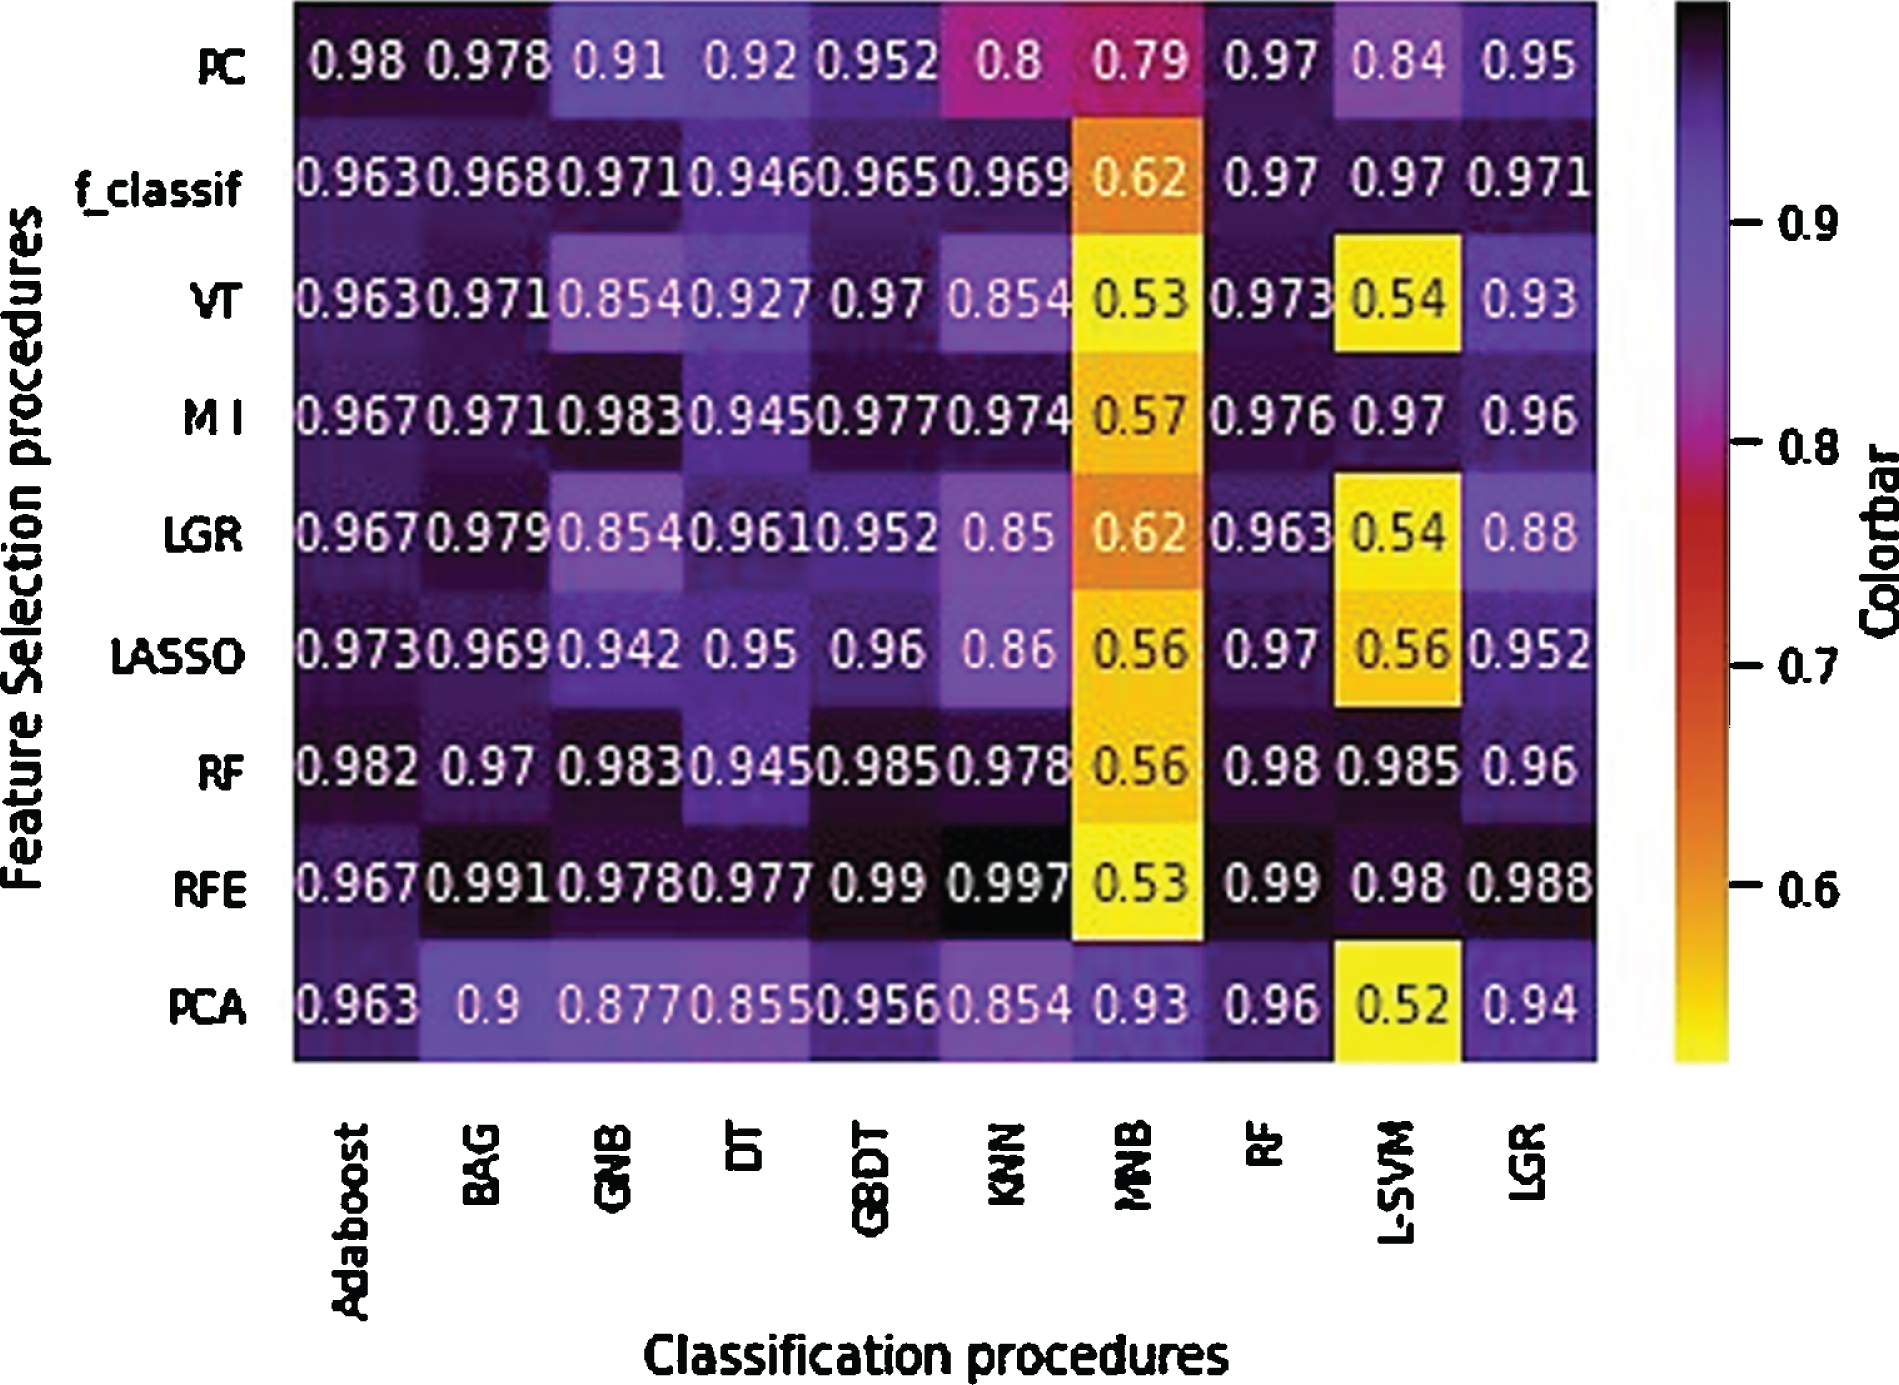 AUC heatmap of the feature selection and feature classification procedures.